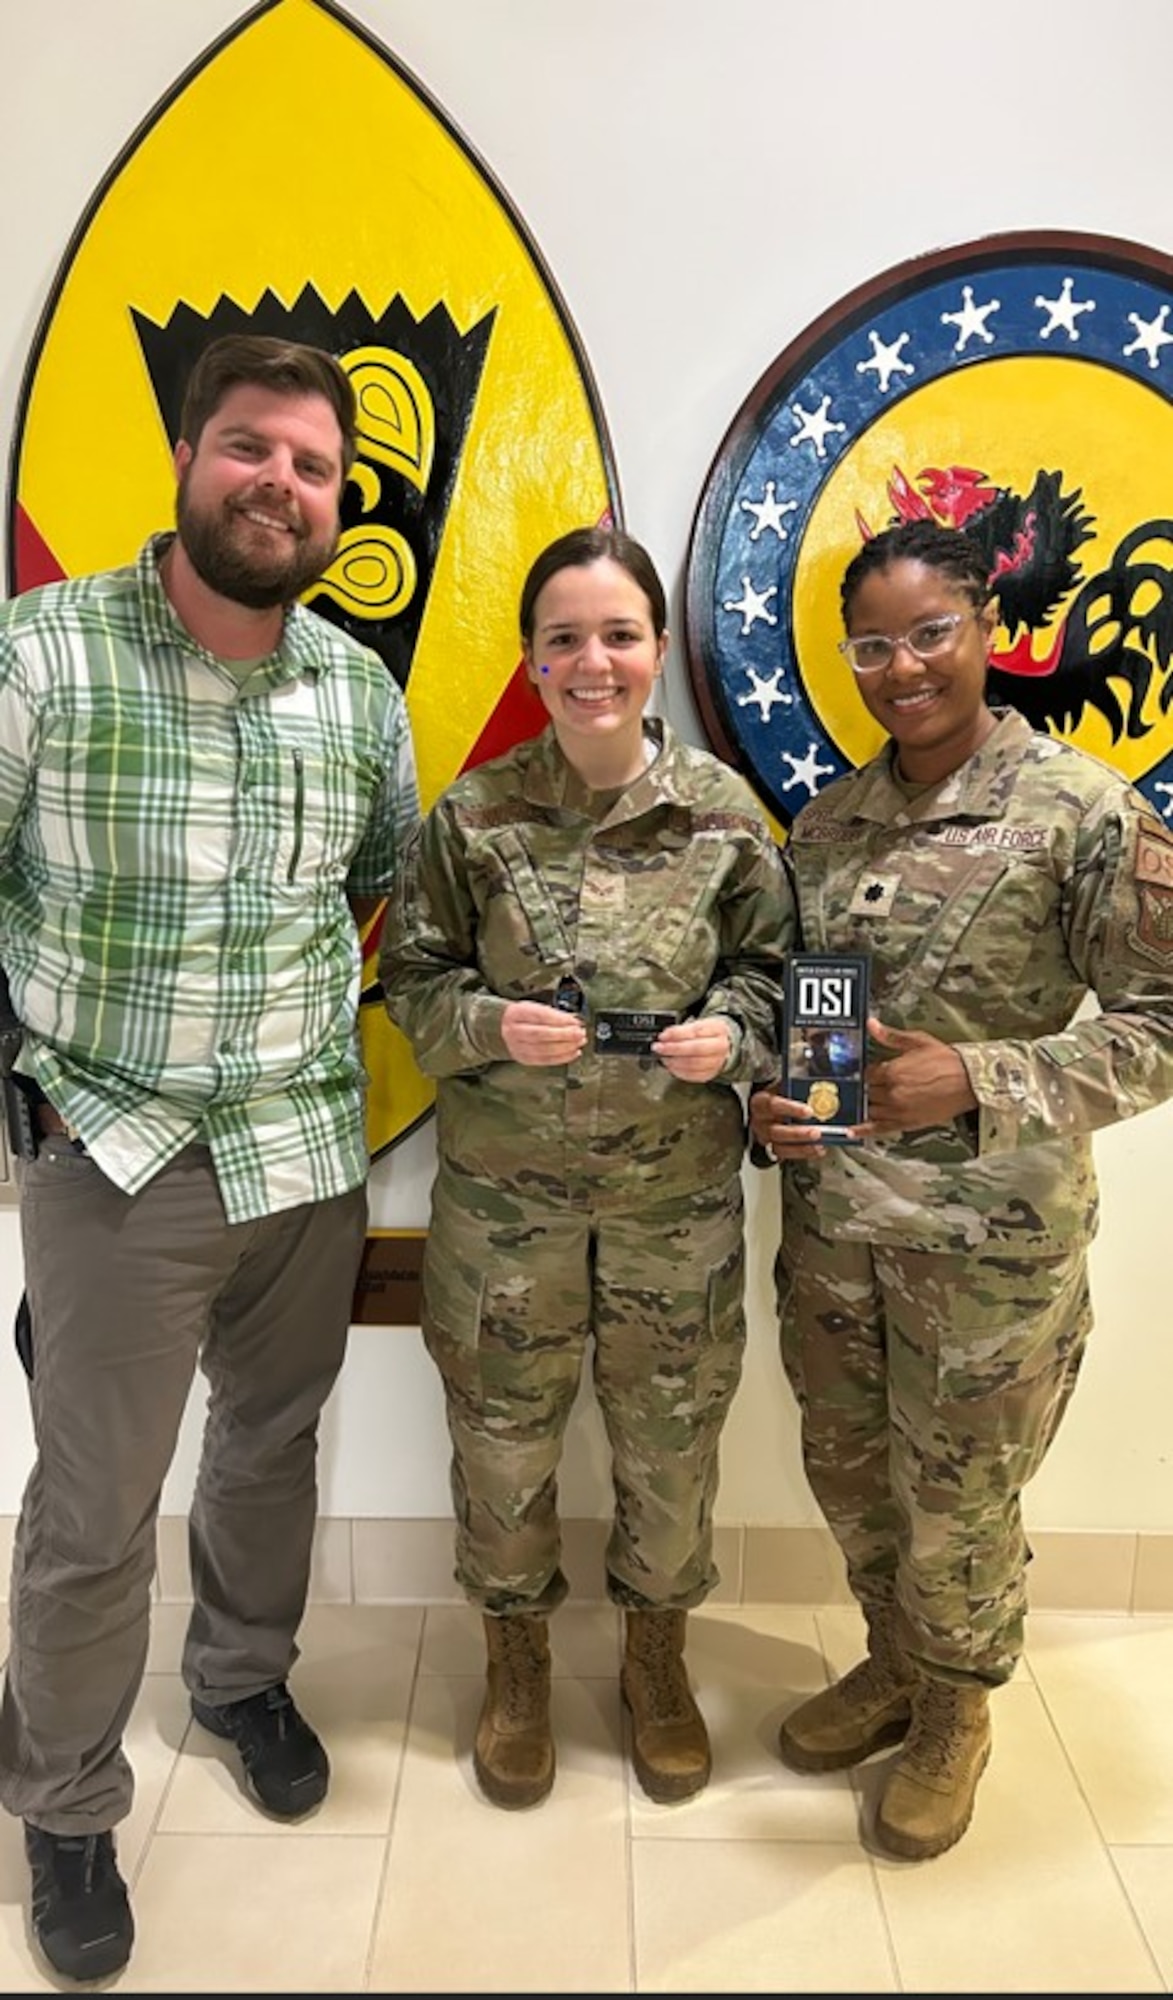 Senior Airman Emily Conaughty was awarded a "golden ticket" by Office of Special Investigations leadership Feb. 13, after she was spotted helping a man near the military gates in Hawaii.